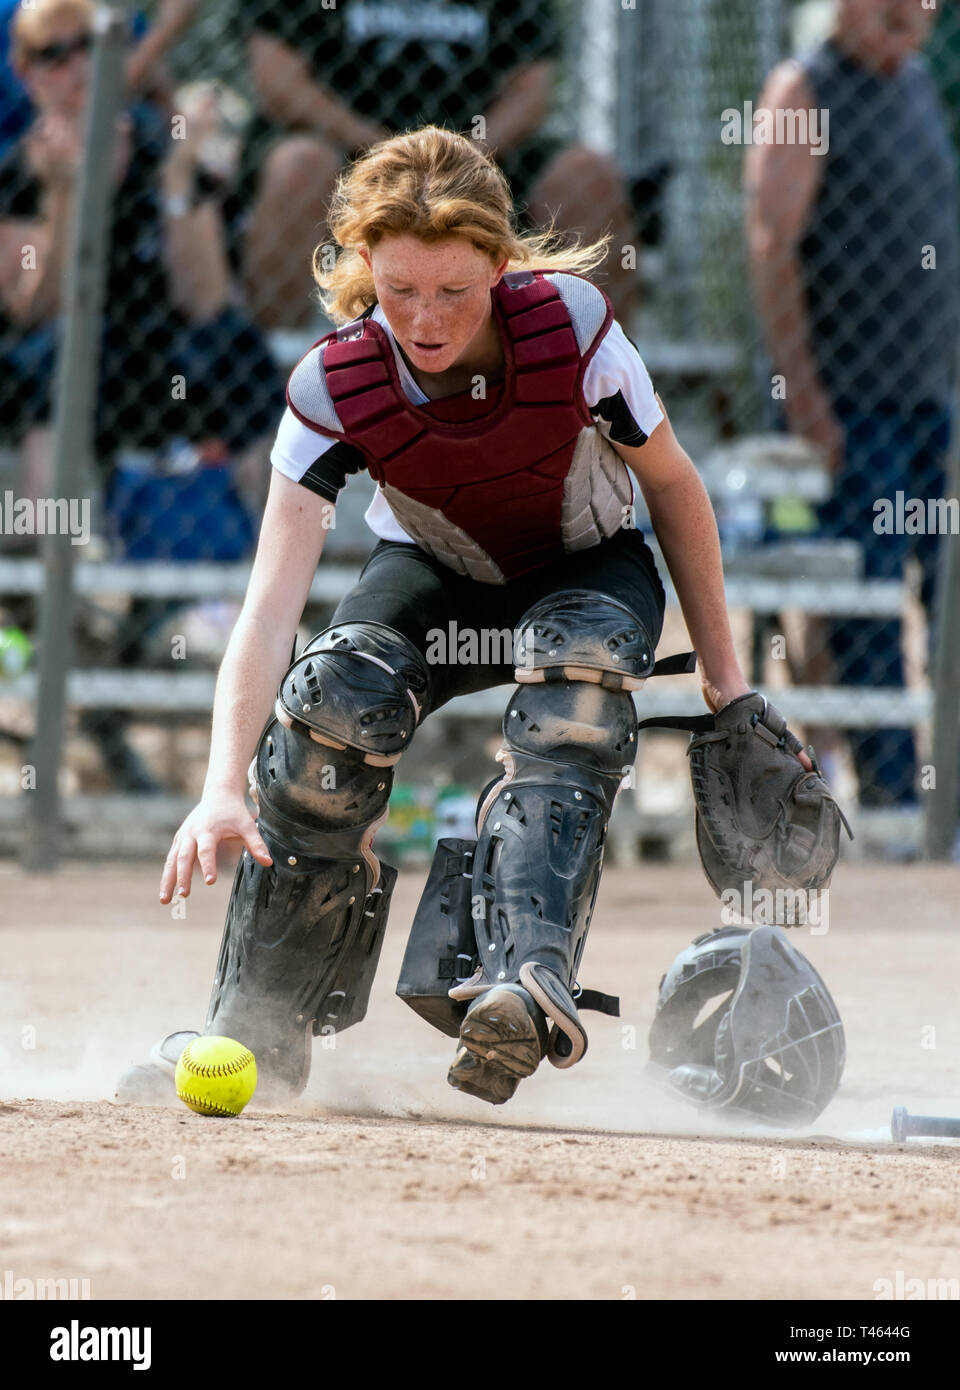 Skilled softbaall catcher with red hair and protective gear scrambling for the loose ball on the field. Stock Photo